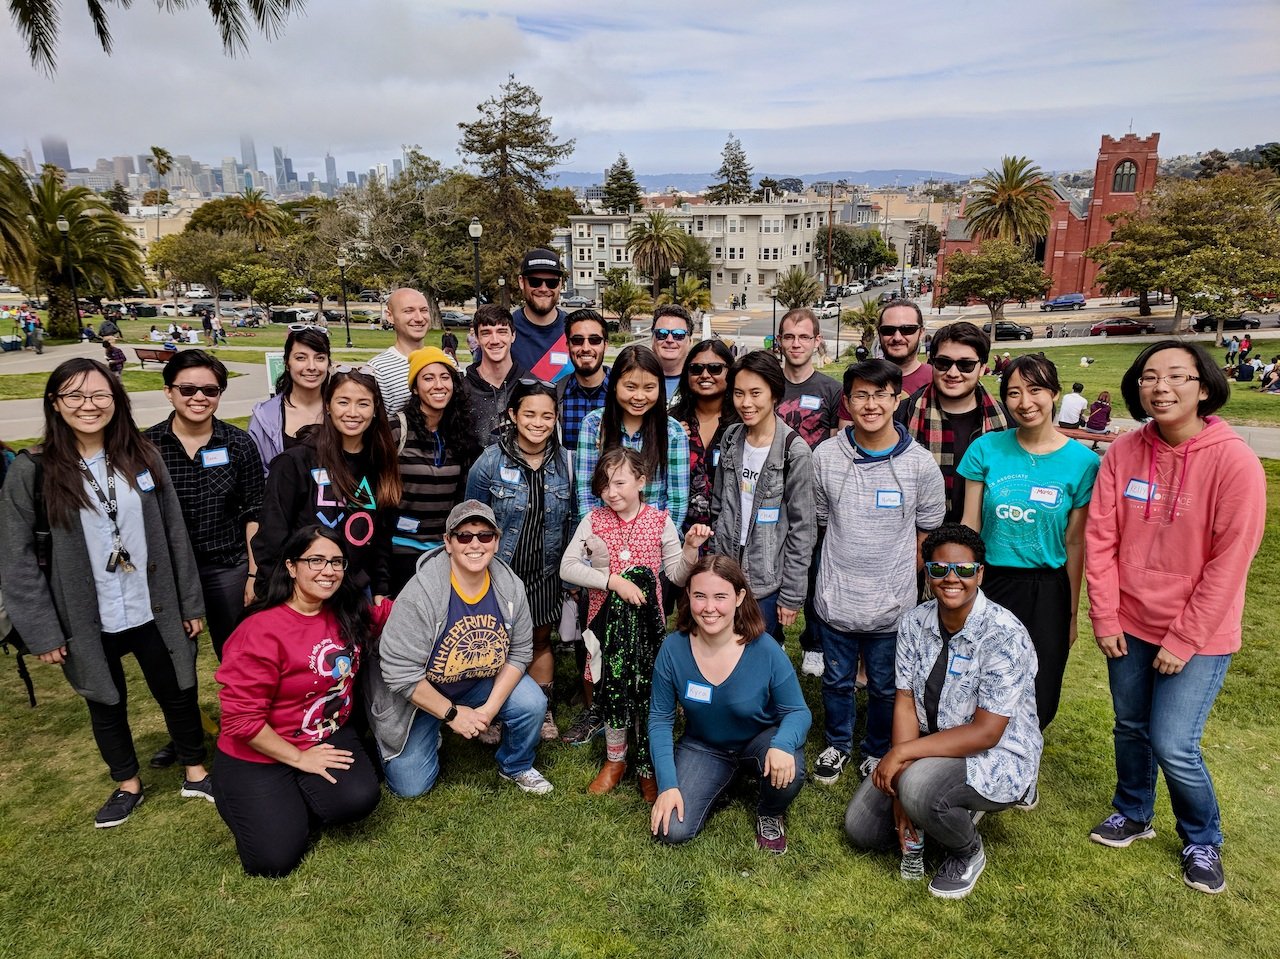 2018 Fellows on a picnic with Tim Schafer and team from Double Fine Studios! (Copy)